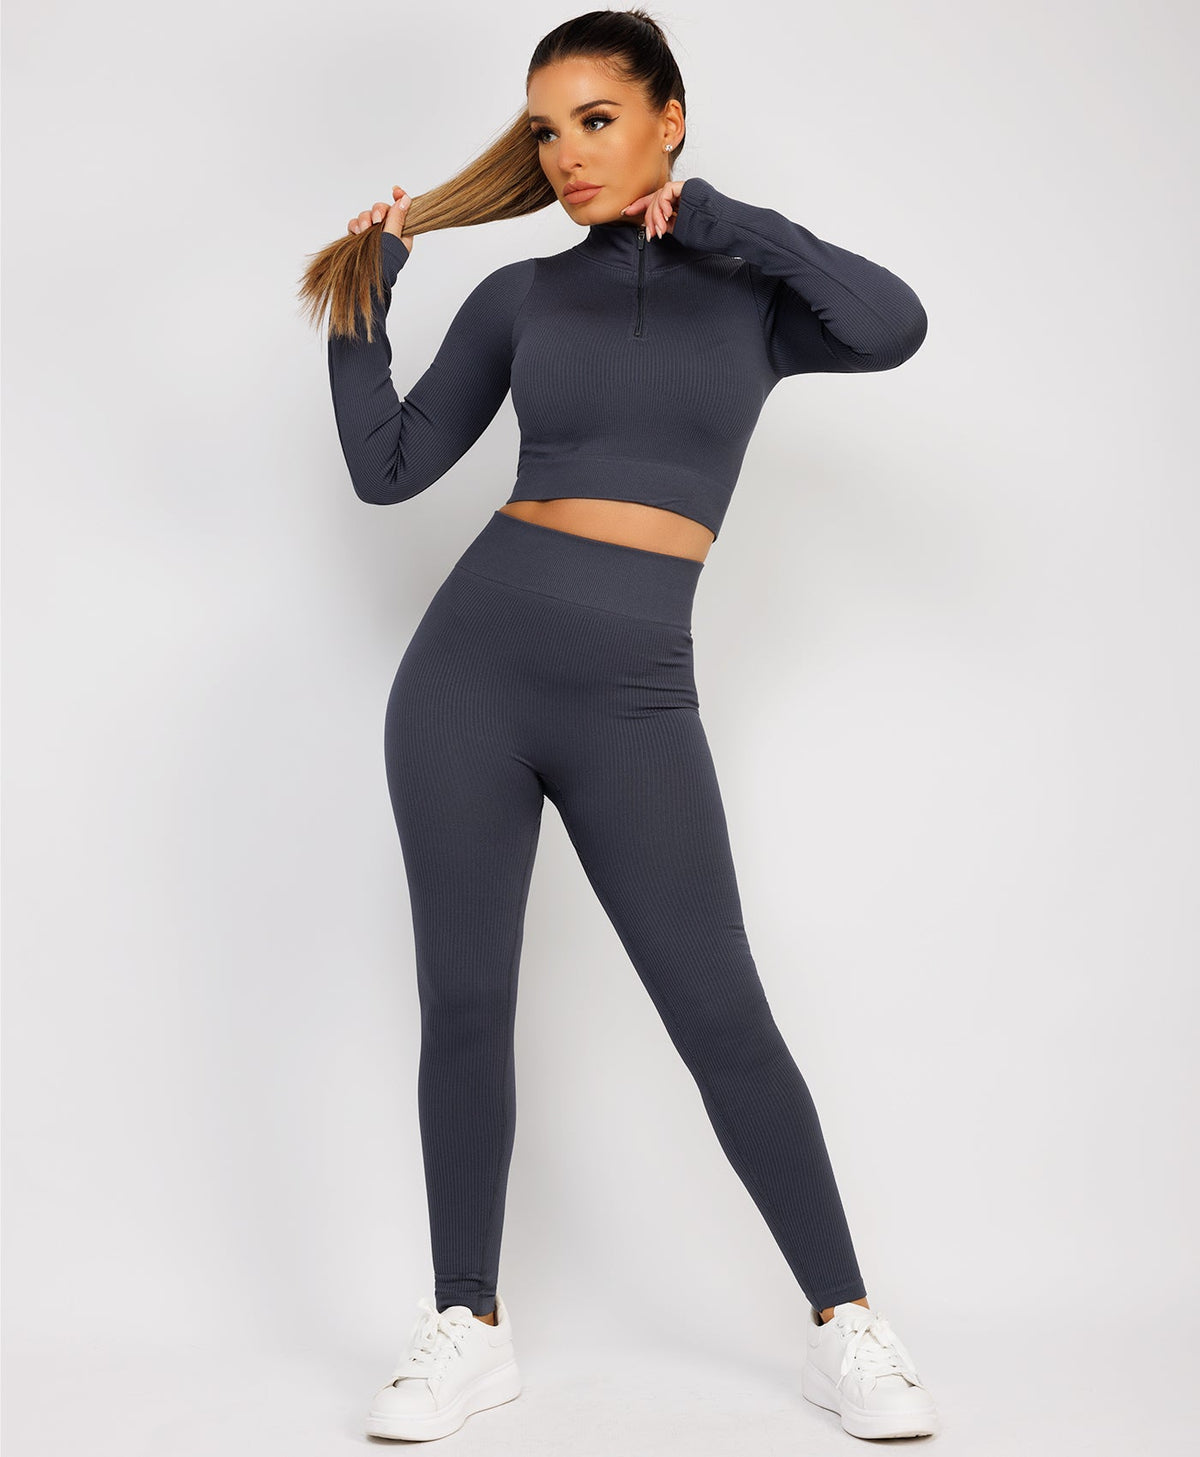 Charcoal-Grey-Zipped-Neck-Ribbed-Activewear-6